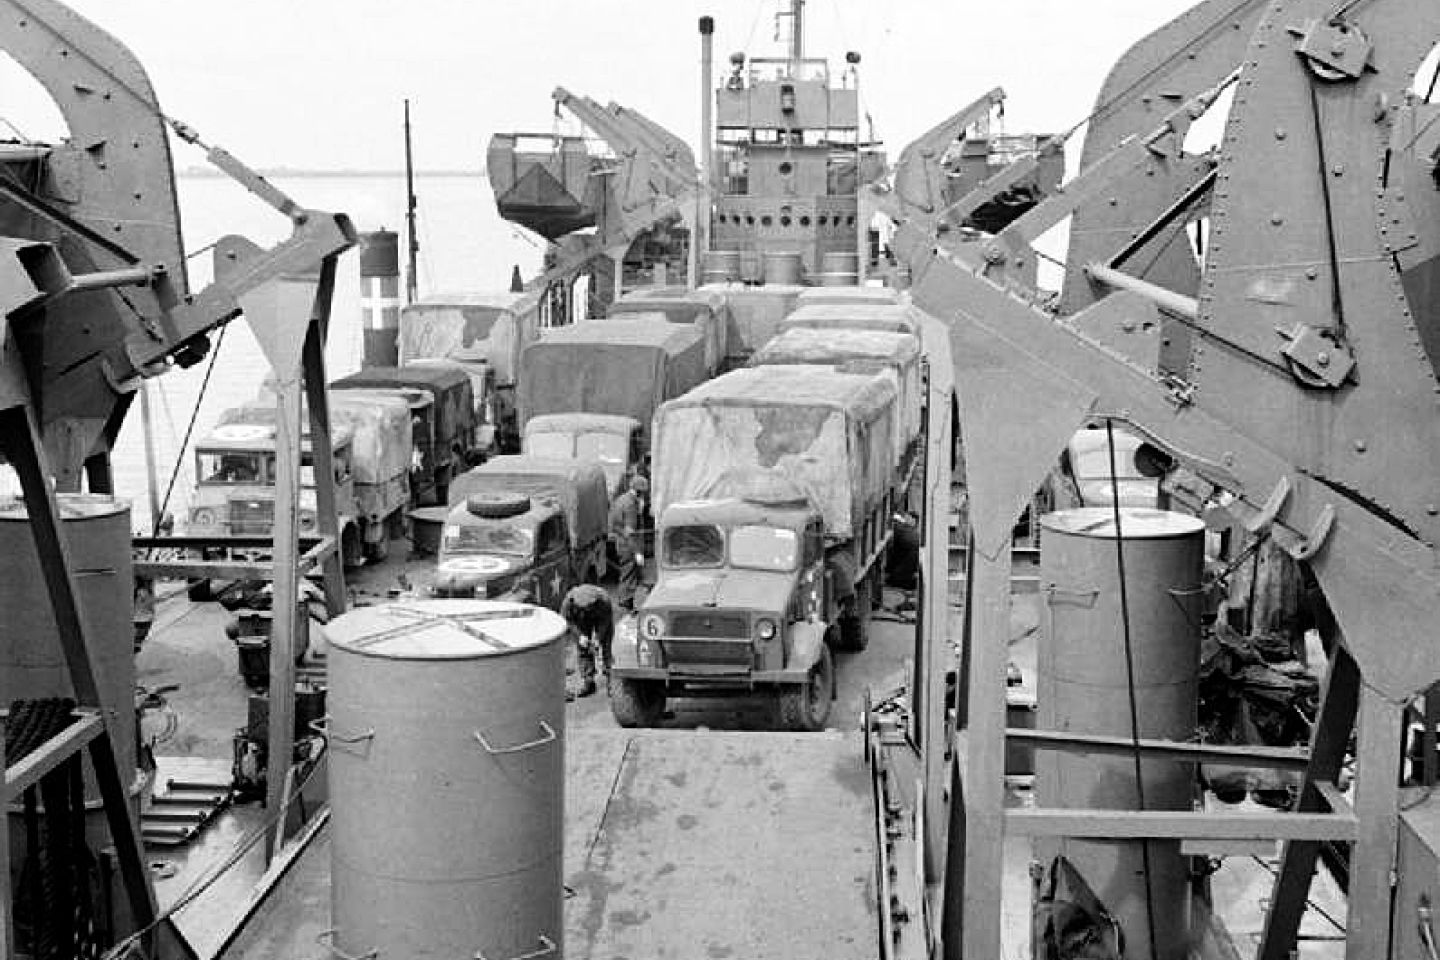 British Army lorries packed onto the upper deck of USS LST-58.